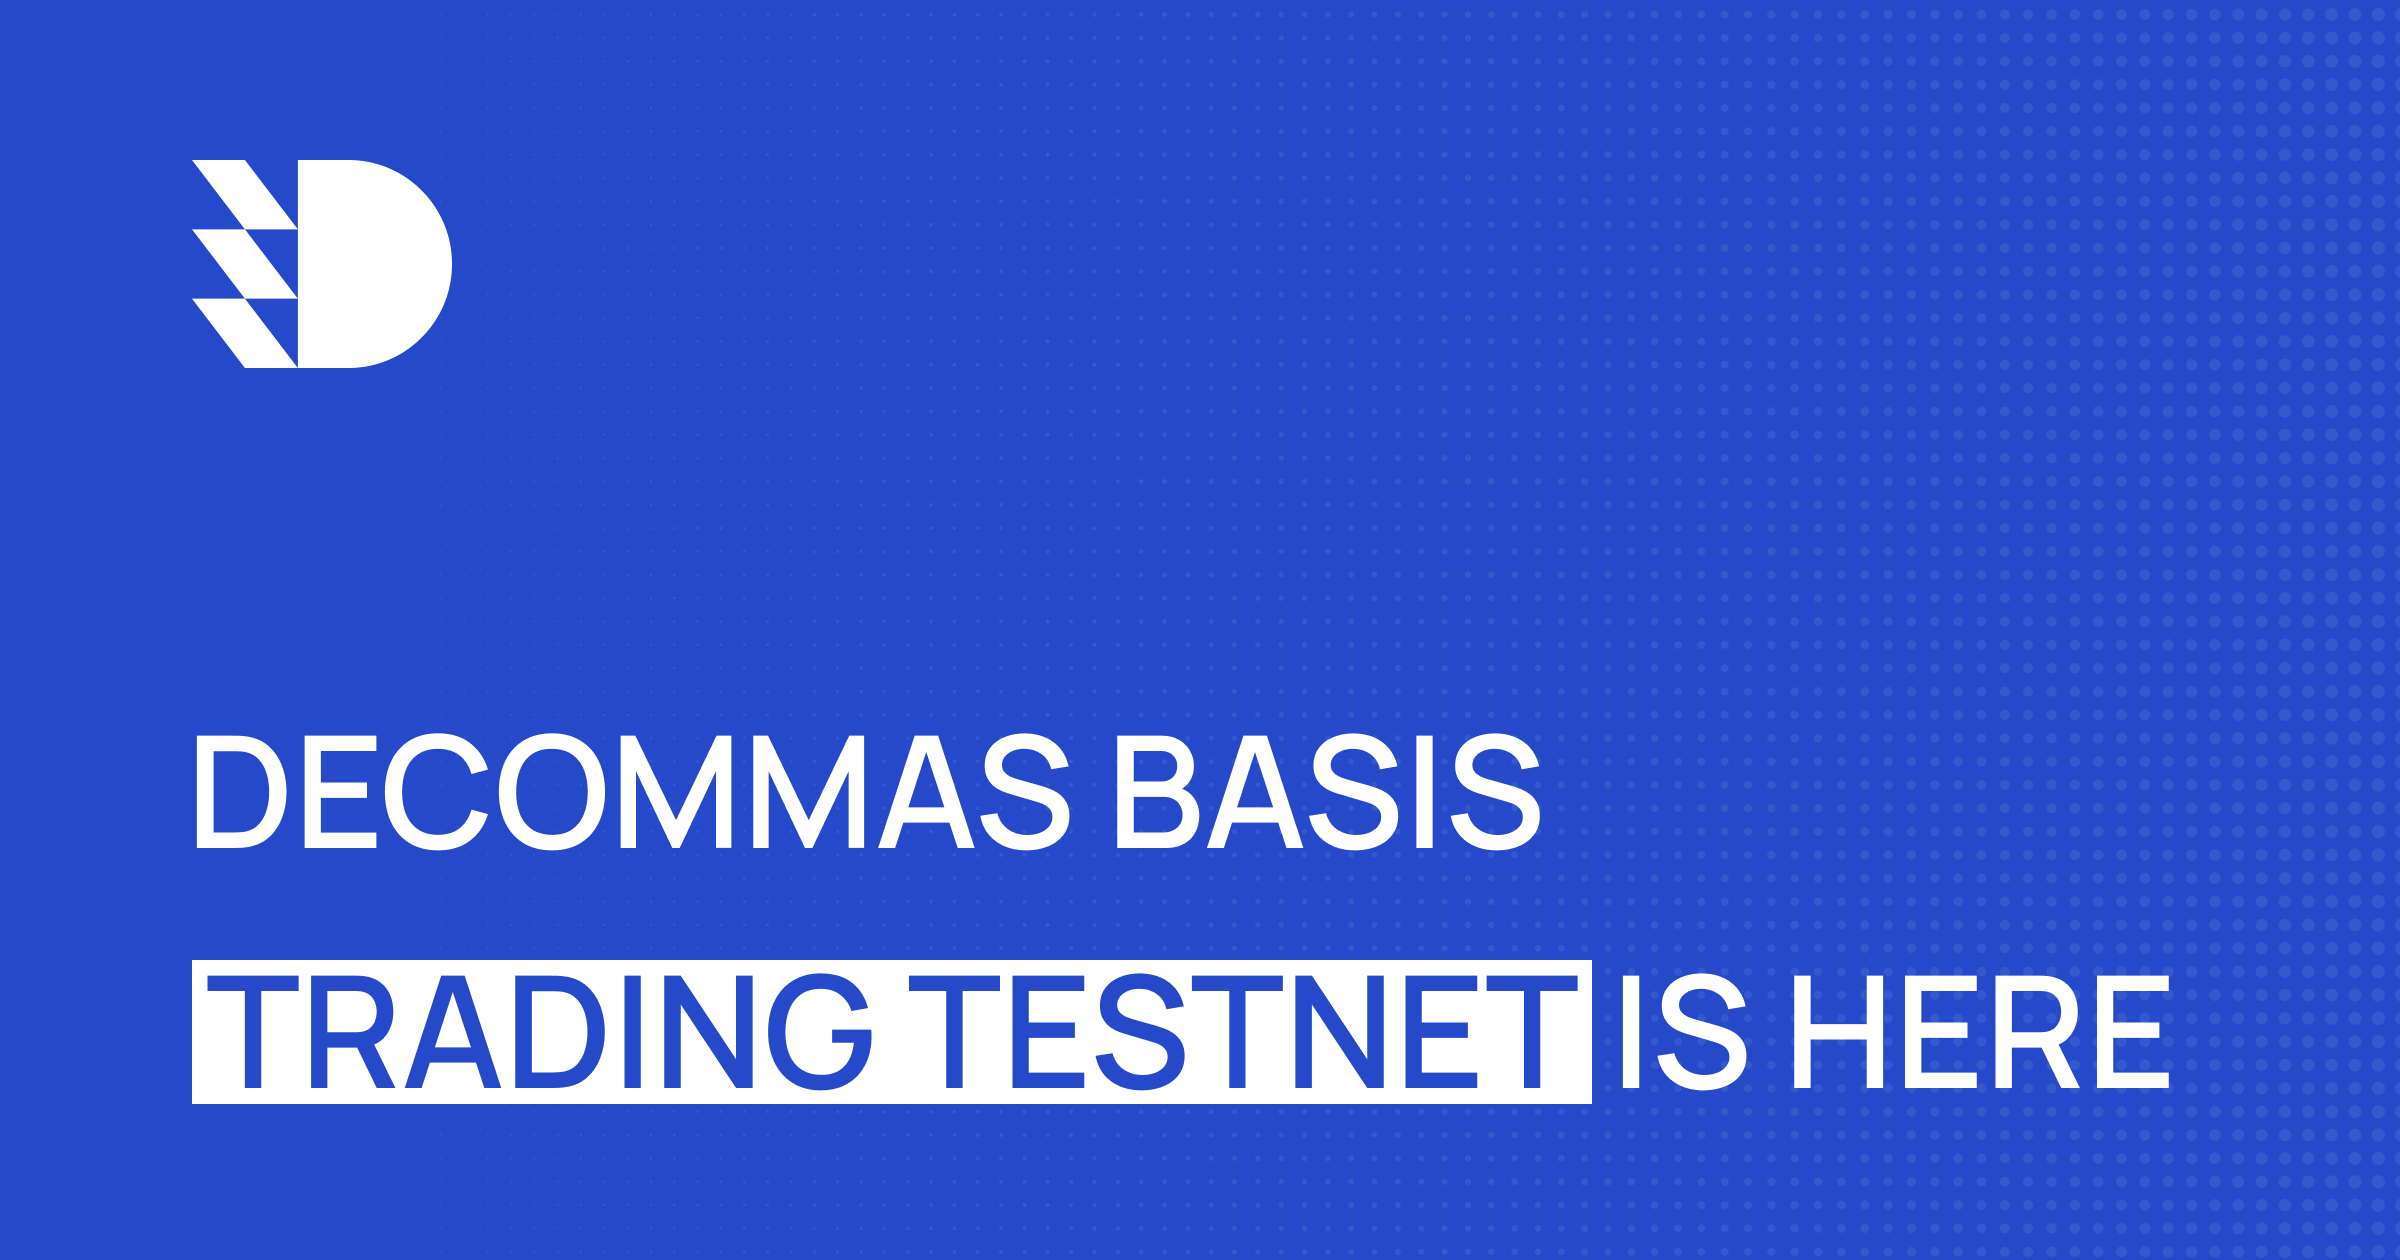 DeCommas Automated Basis Trading Testnet is here!